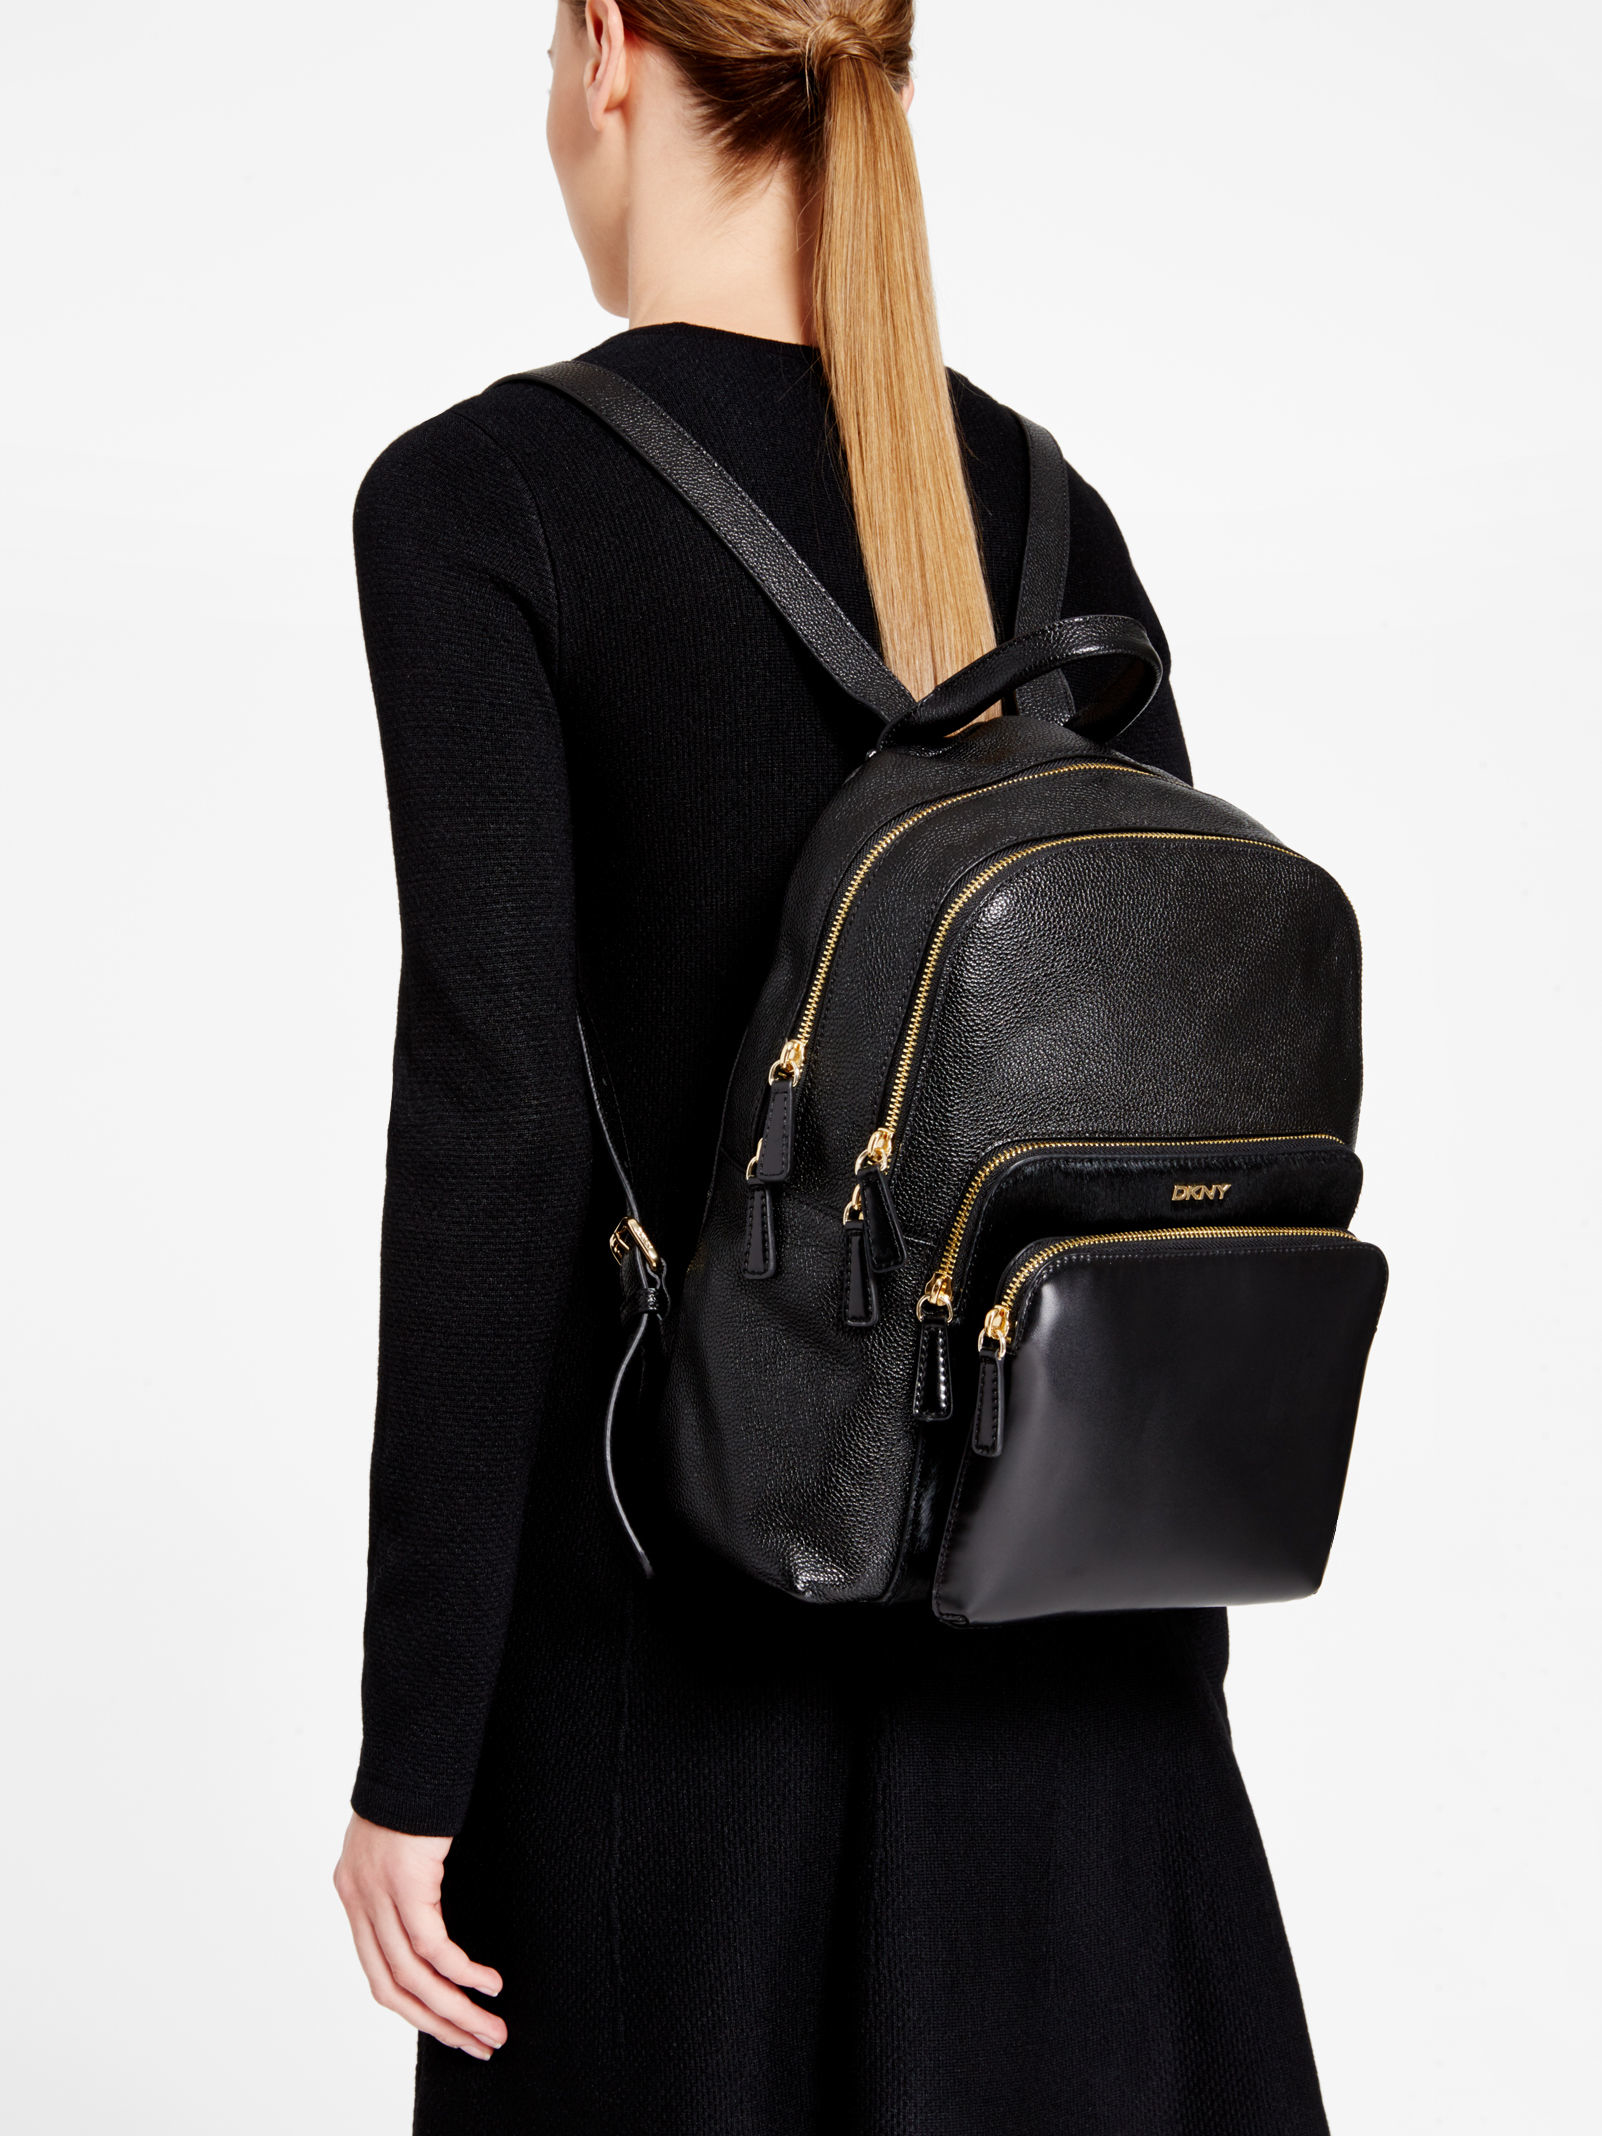 DKNY Mixed Material Backpack in Black - Lyst